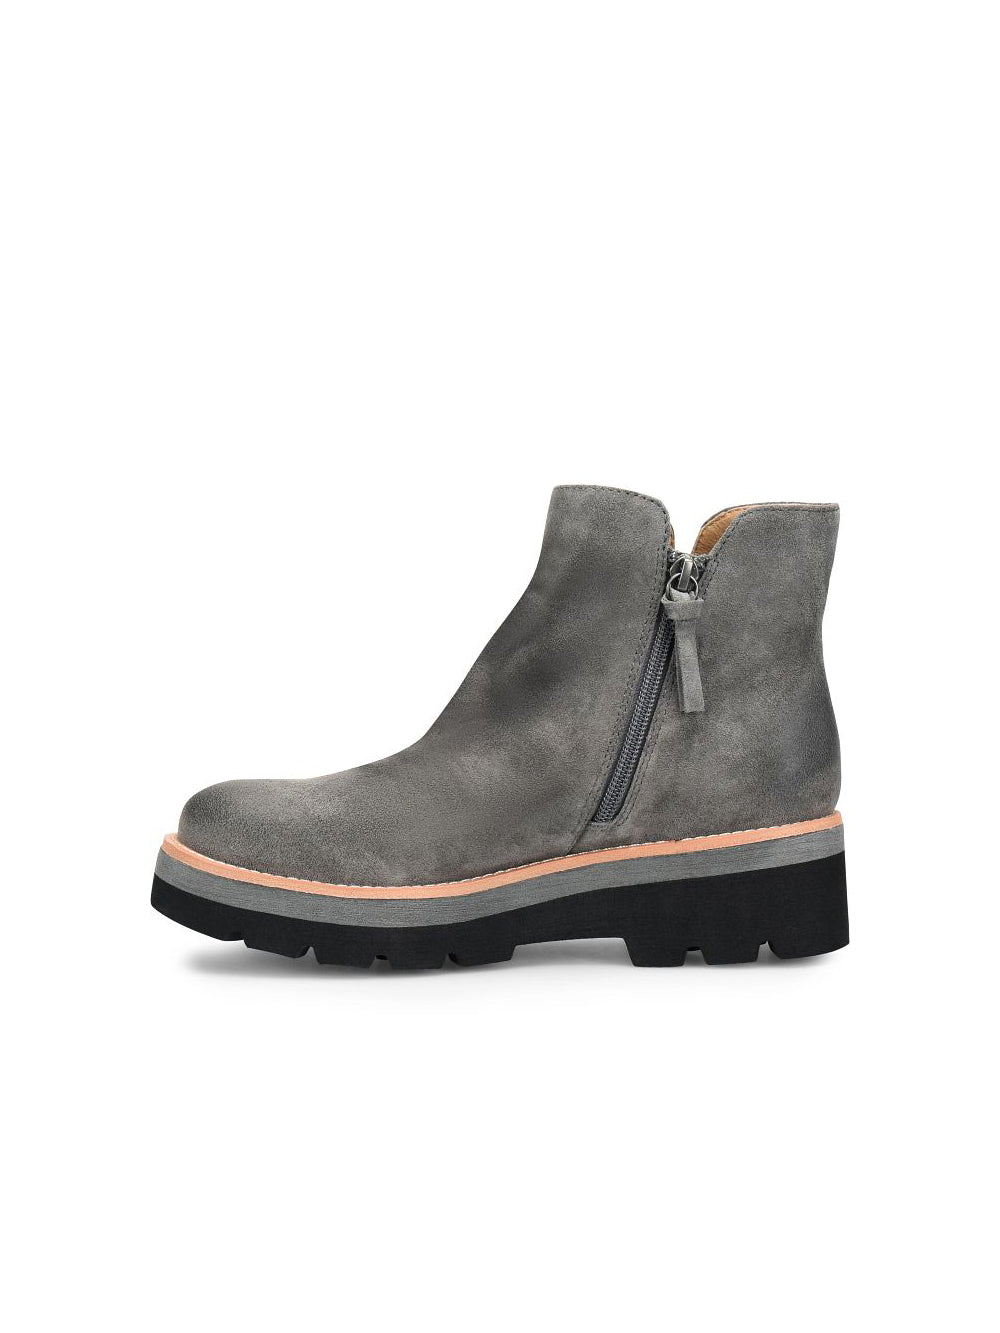 sofft pecula slouch lugg bootie in smoke